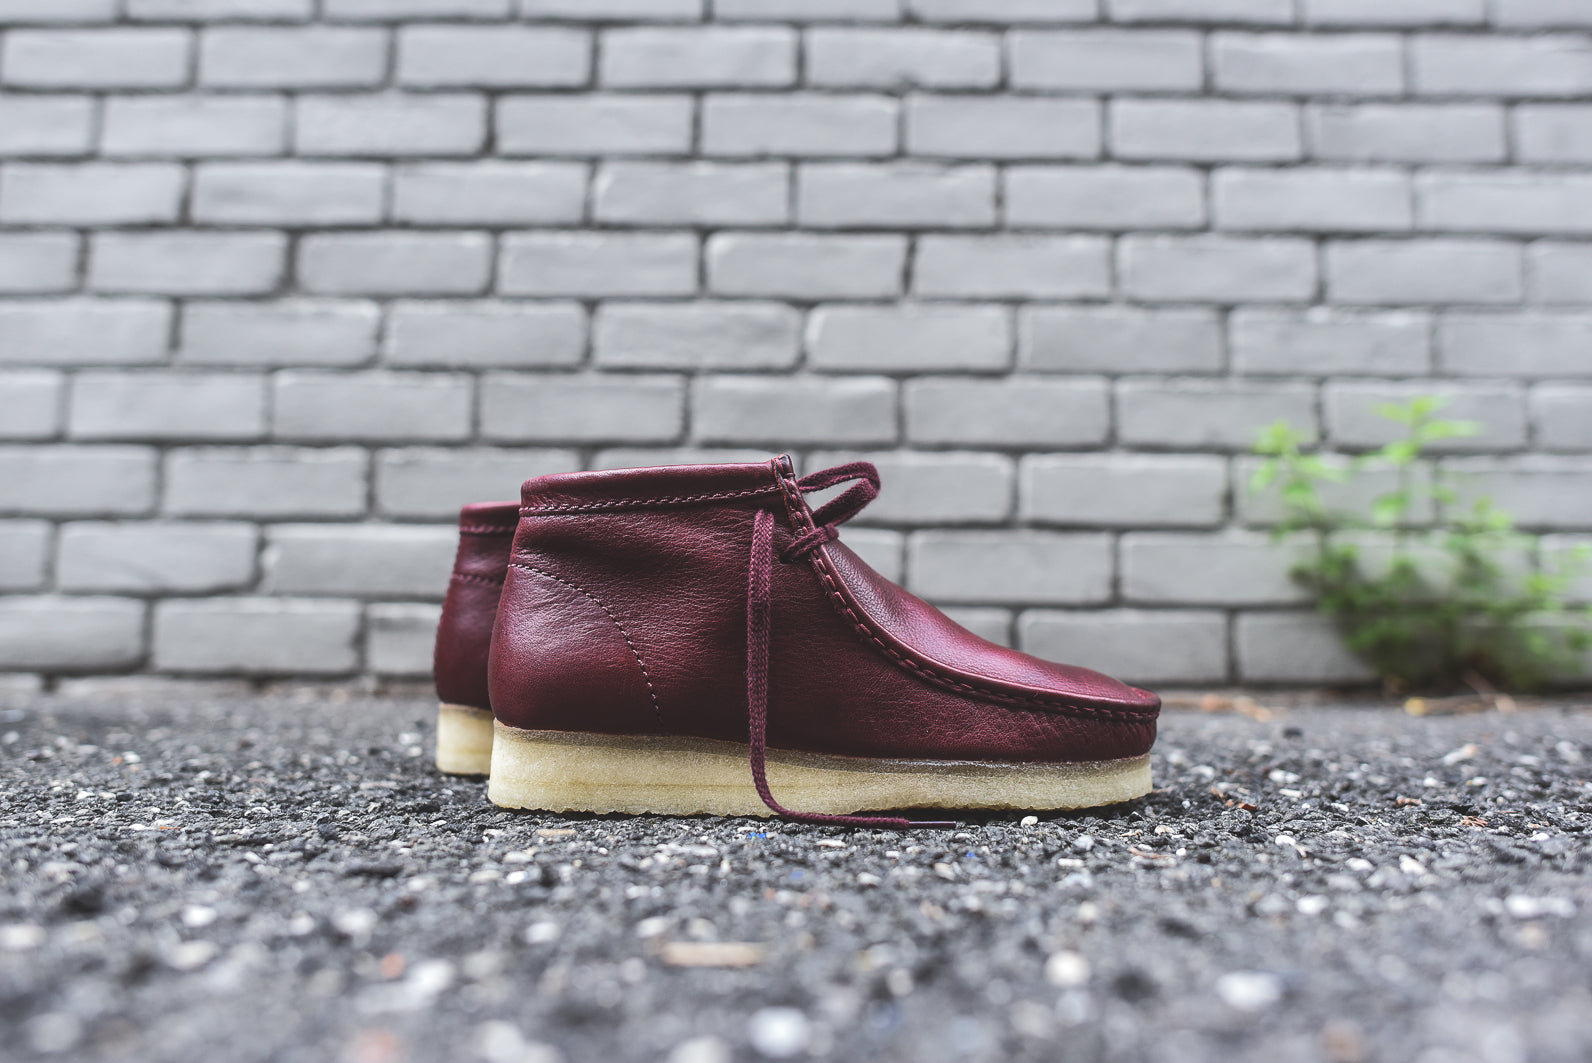 Clarks Fall/Winter 2015 Collection – Kith